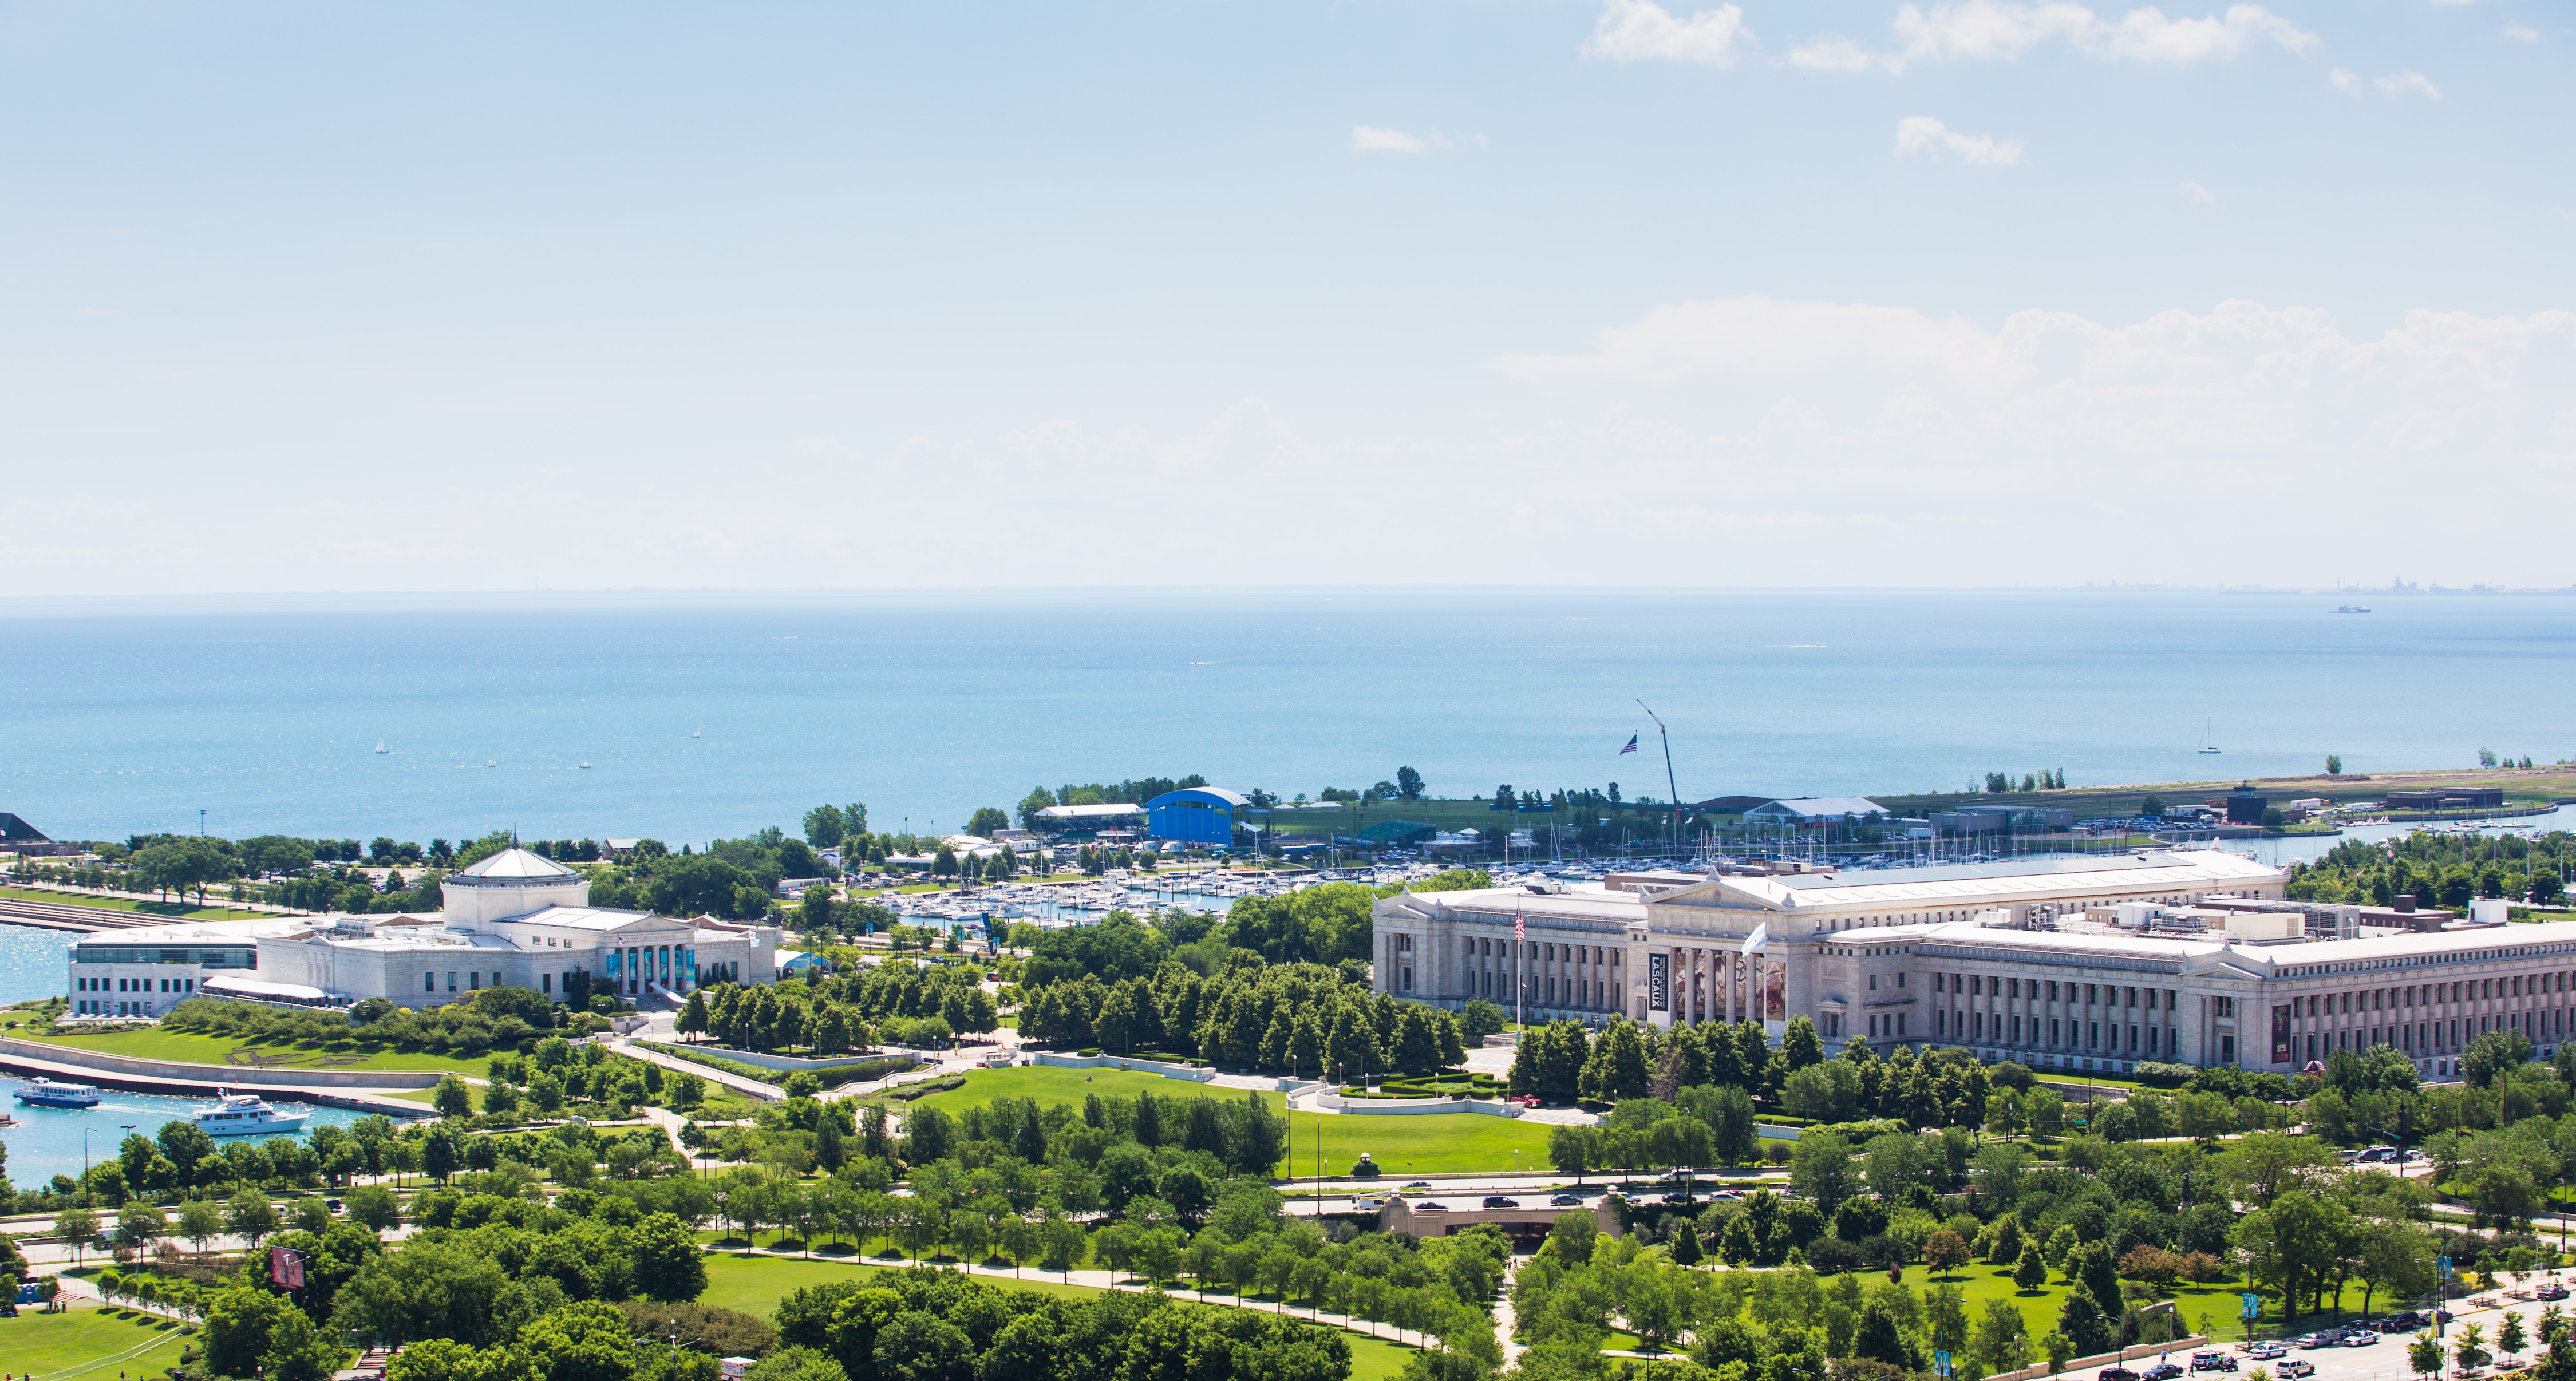 Museum Campus Field and Shedd